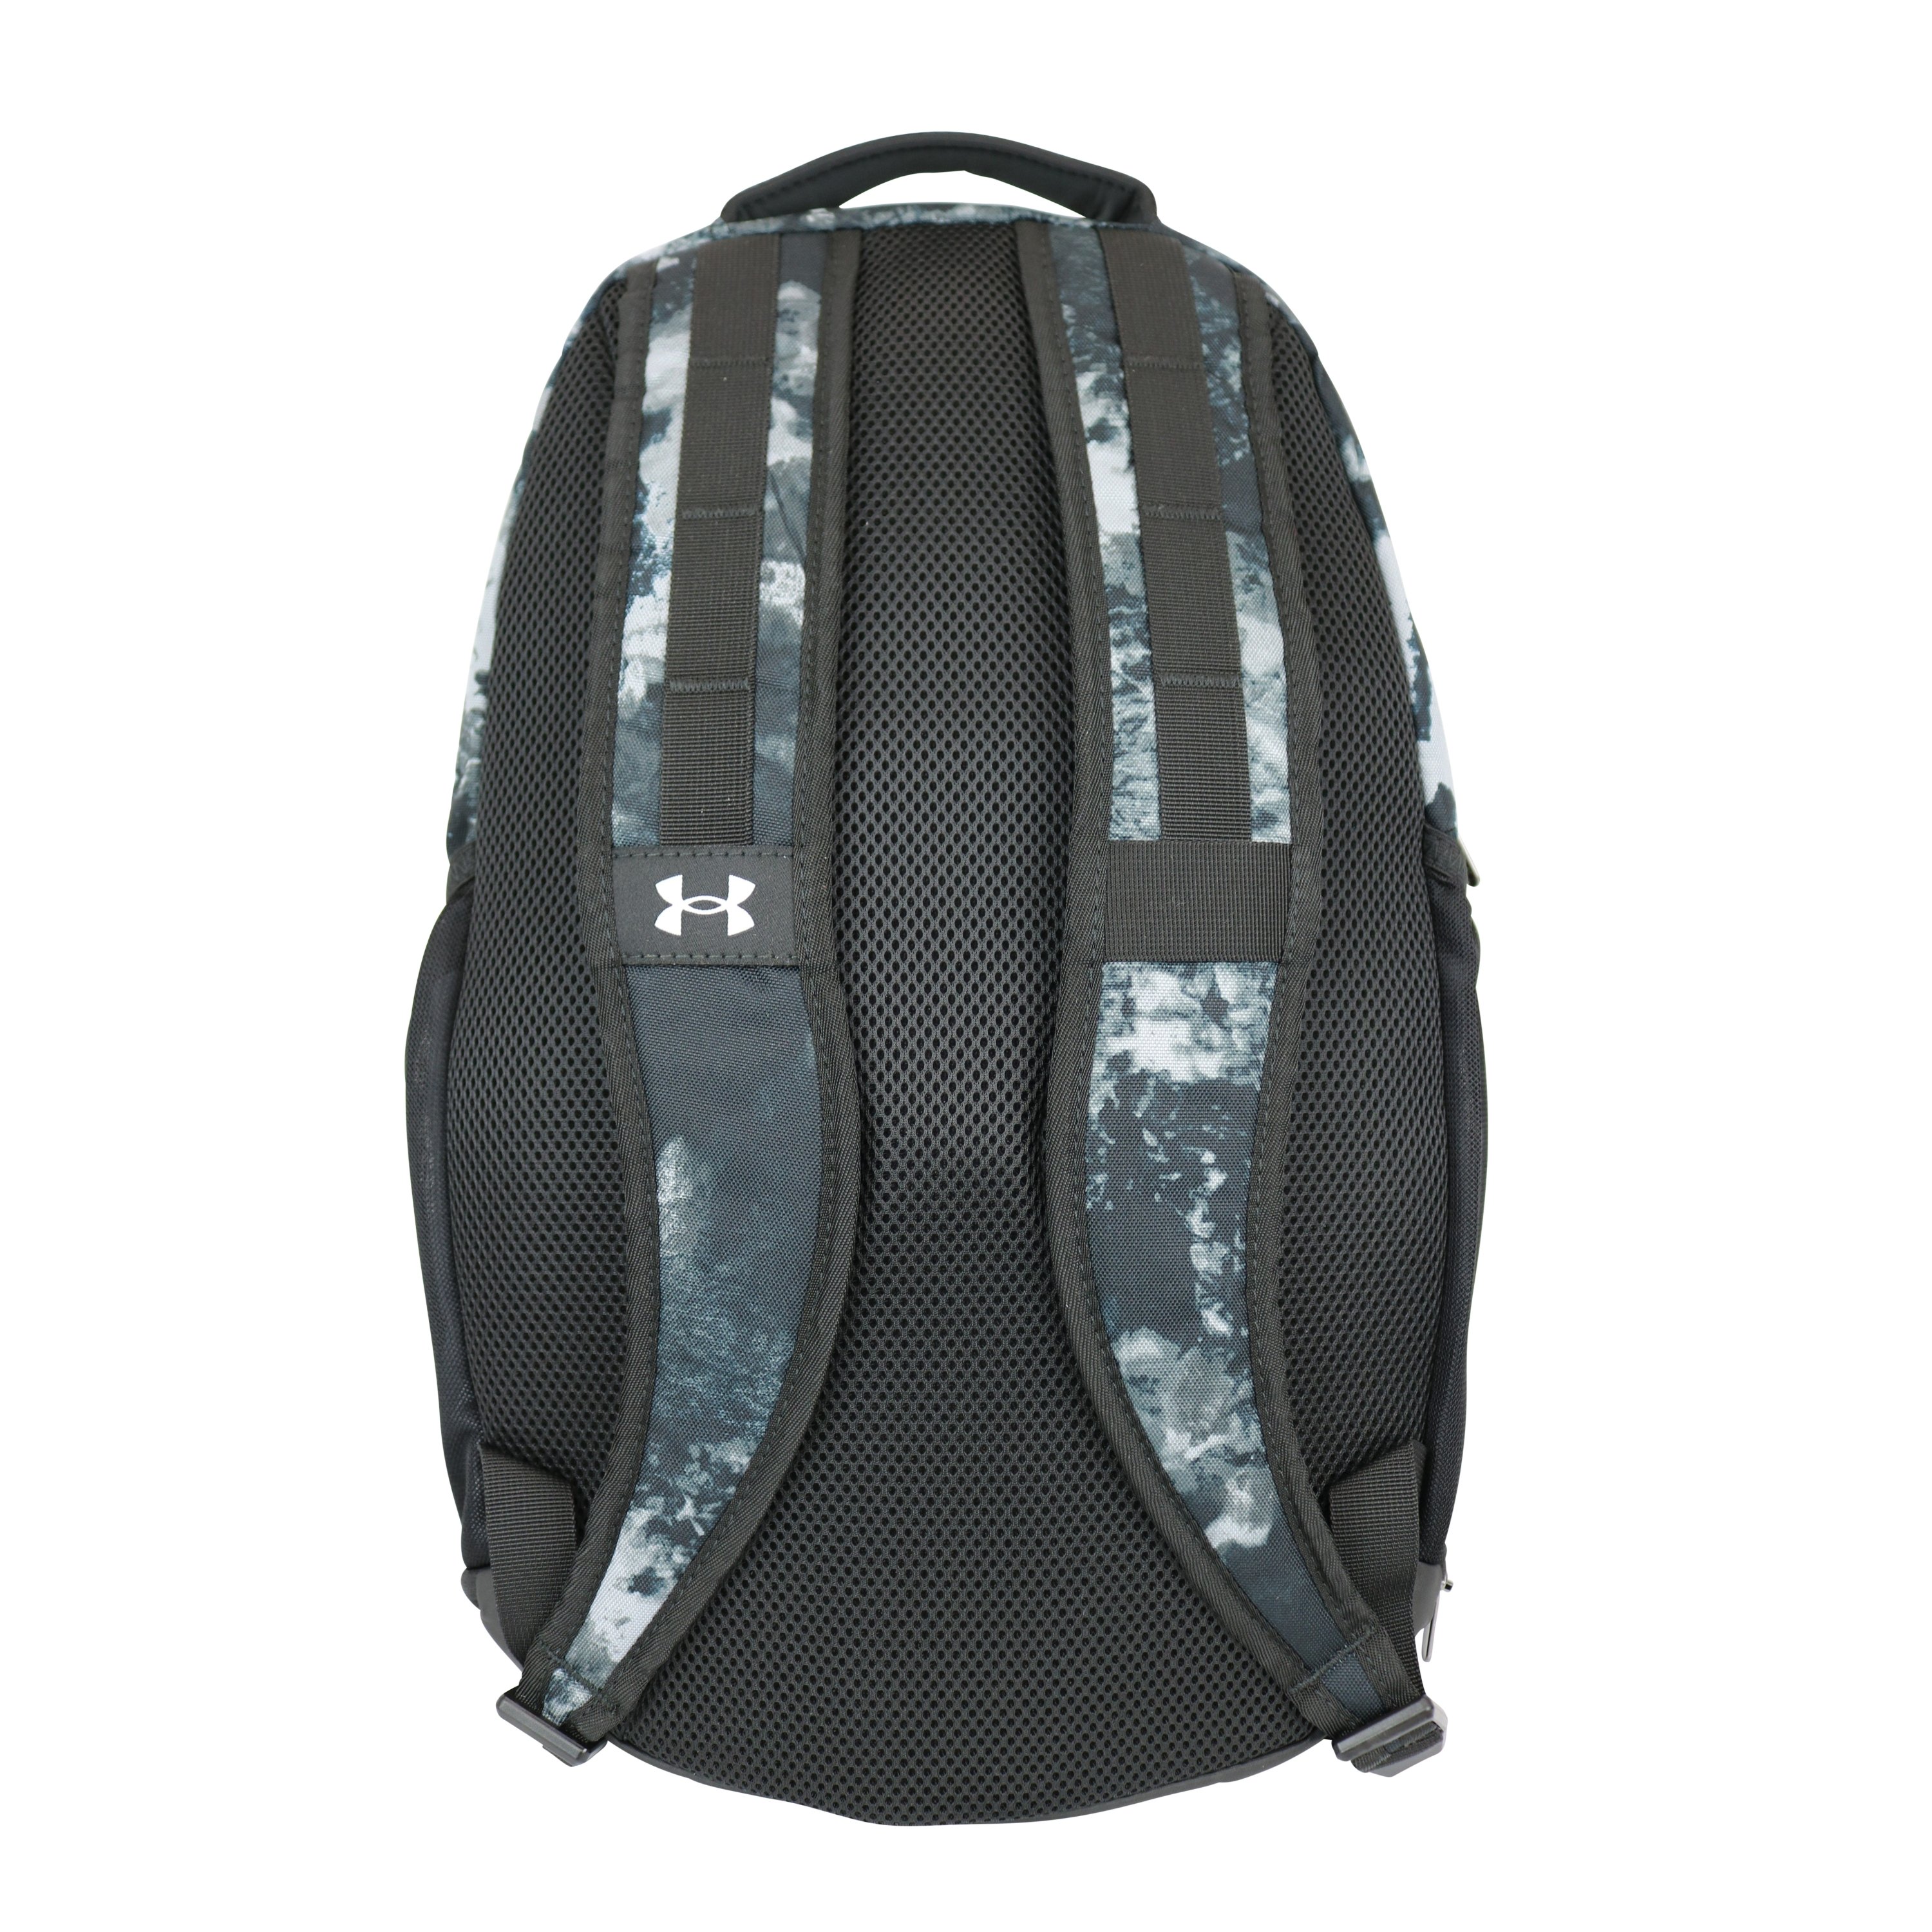 Under Armour Hustle 5.0 Backpack - Academy - Shop Backpacks at H-E-B